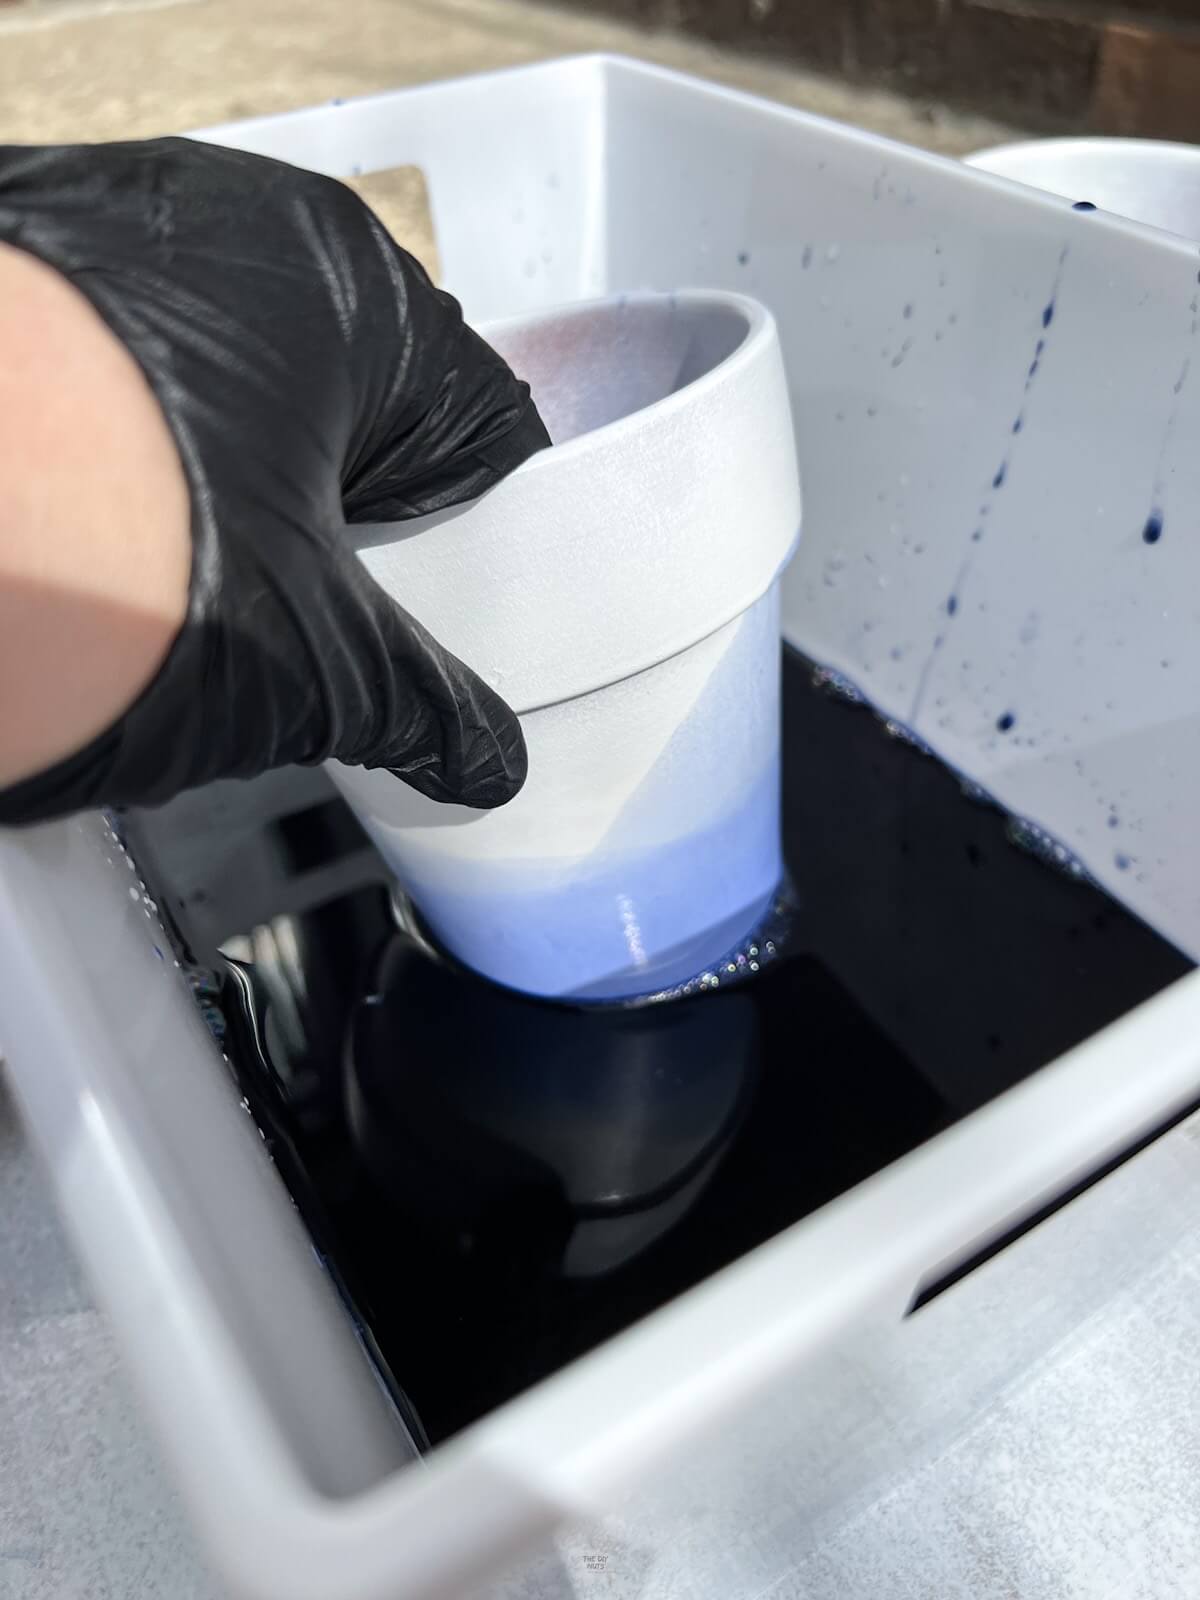 painted flower pot being dipped into blue dyed water.